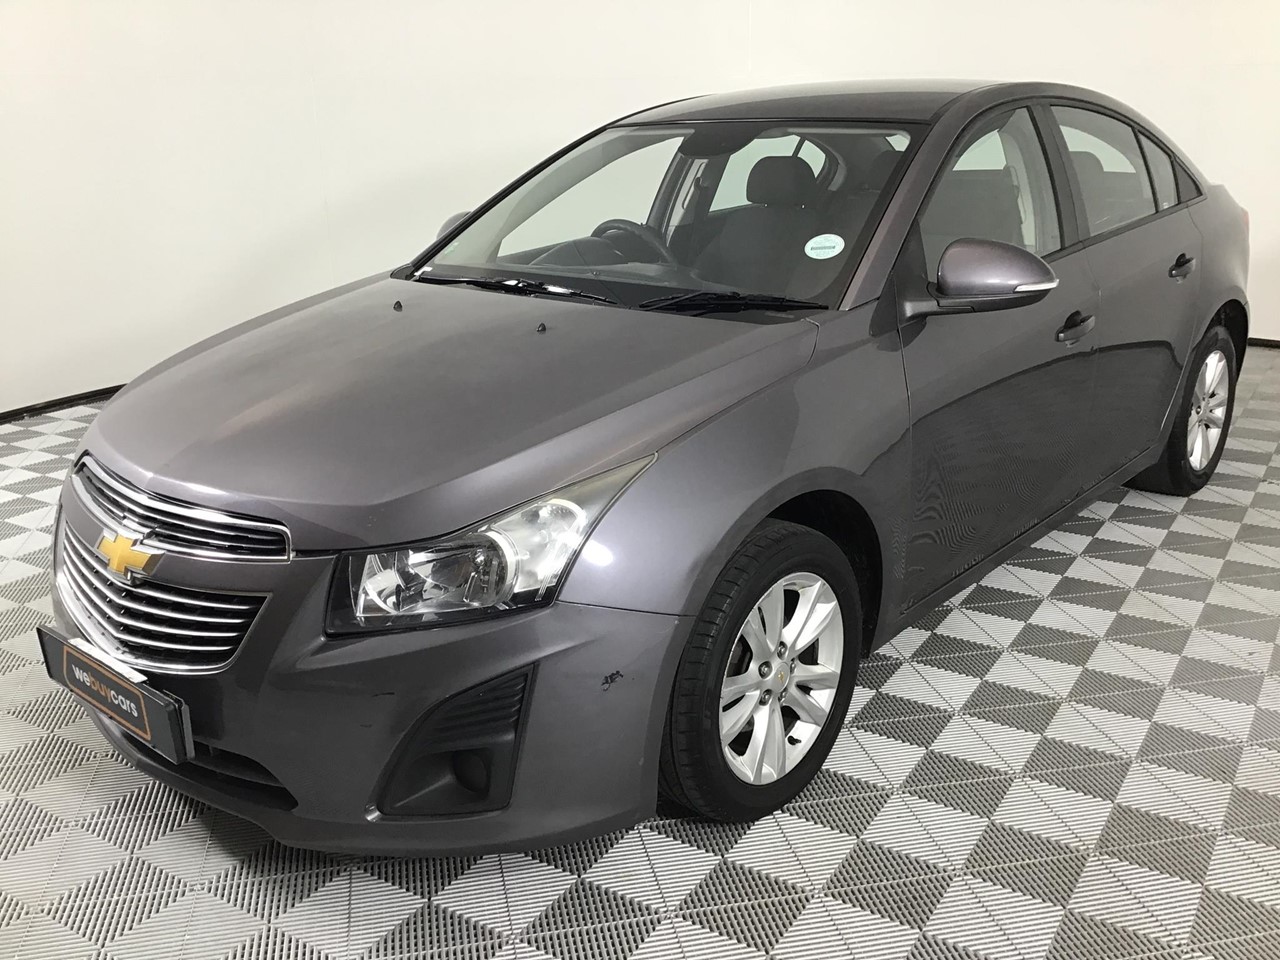 Used 2014 Chevrolet Cruze 1.6 LS for sale WeBuyCars